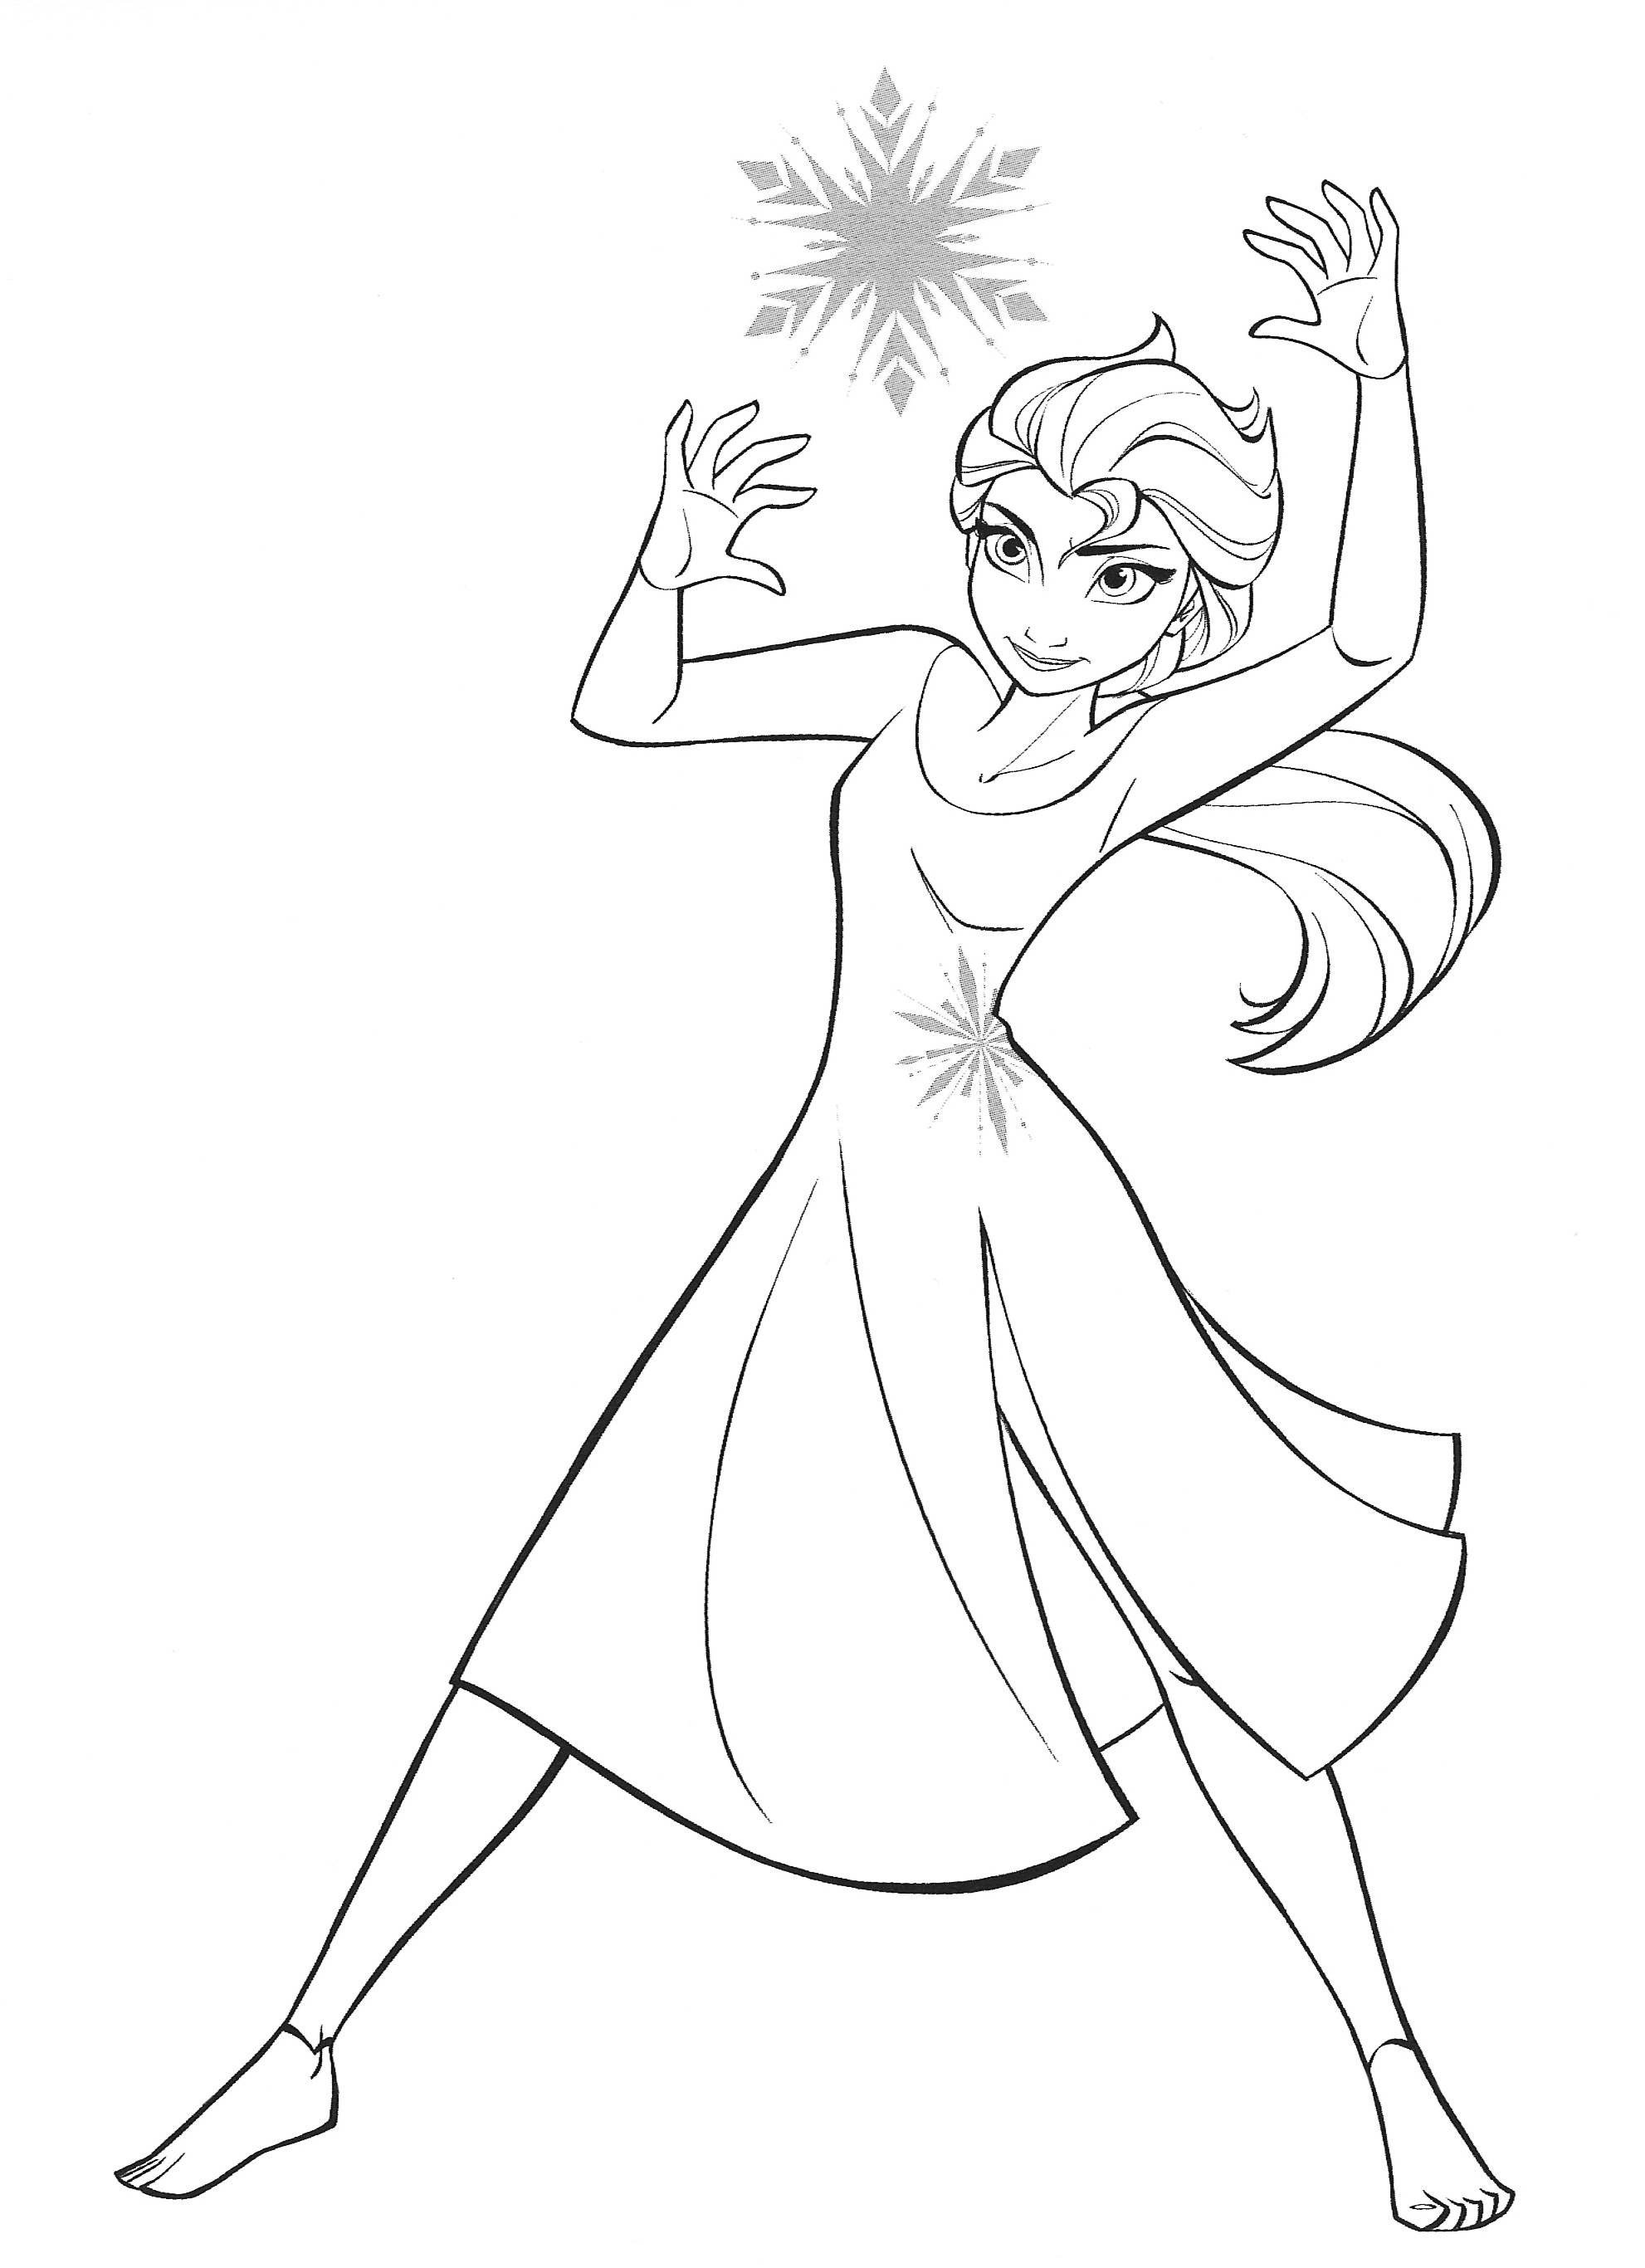 Frozen 2 Coloring Pages Into The Unknown - colouring mermaid